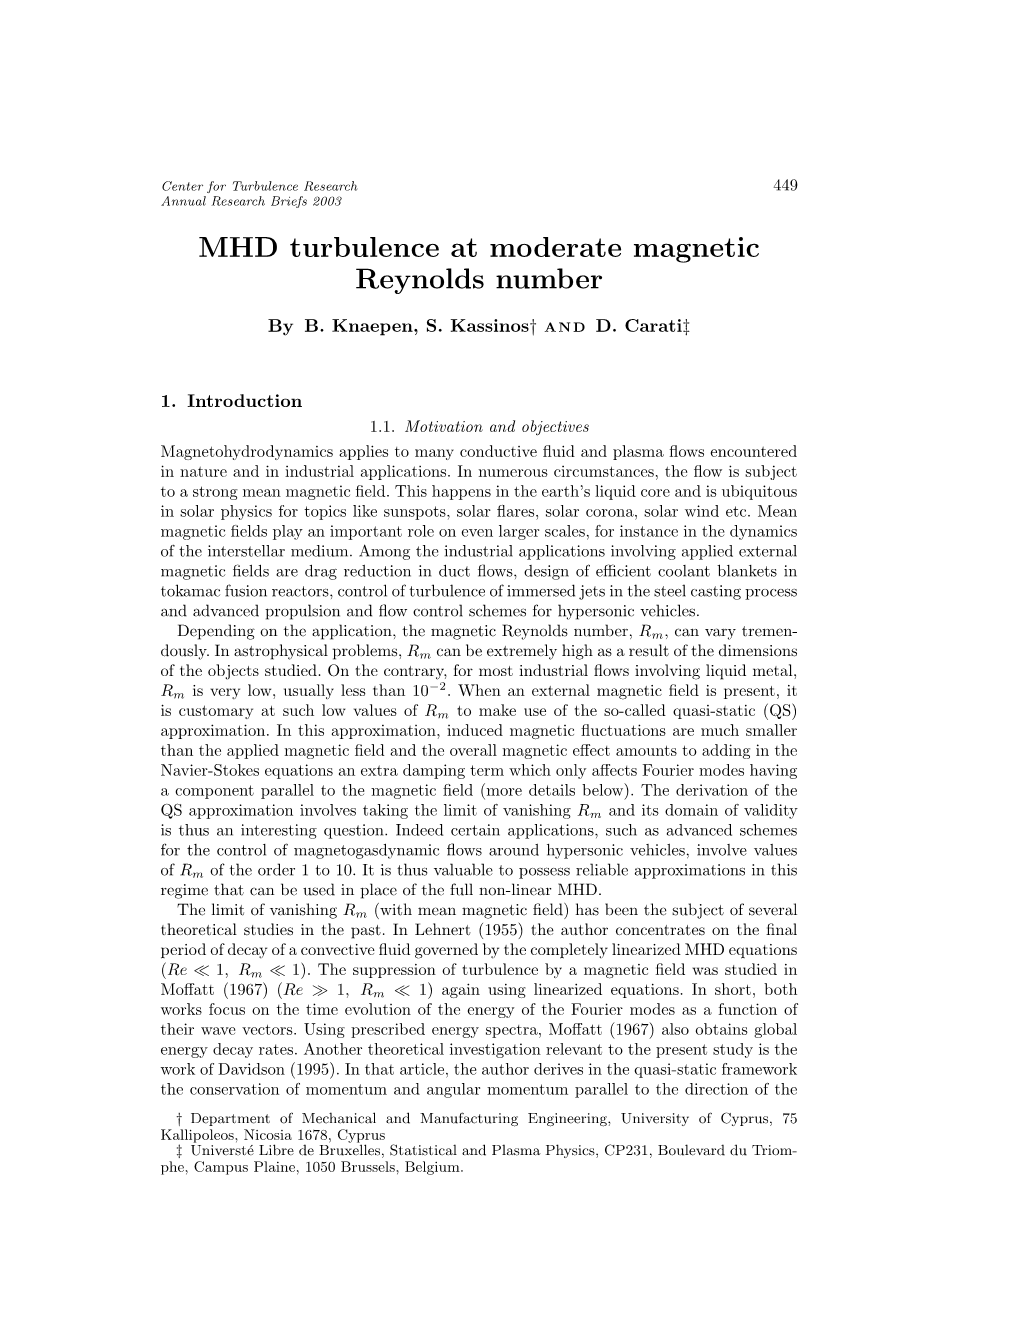 MHD Turbulence at Moderate Magnetic Reynolds Number